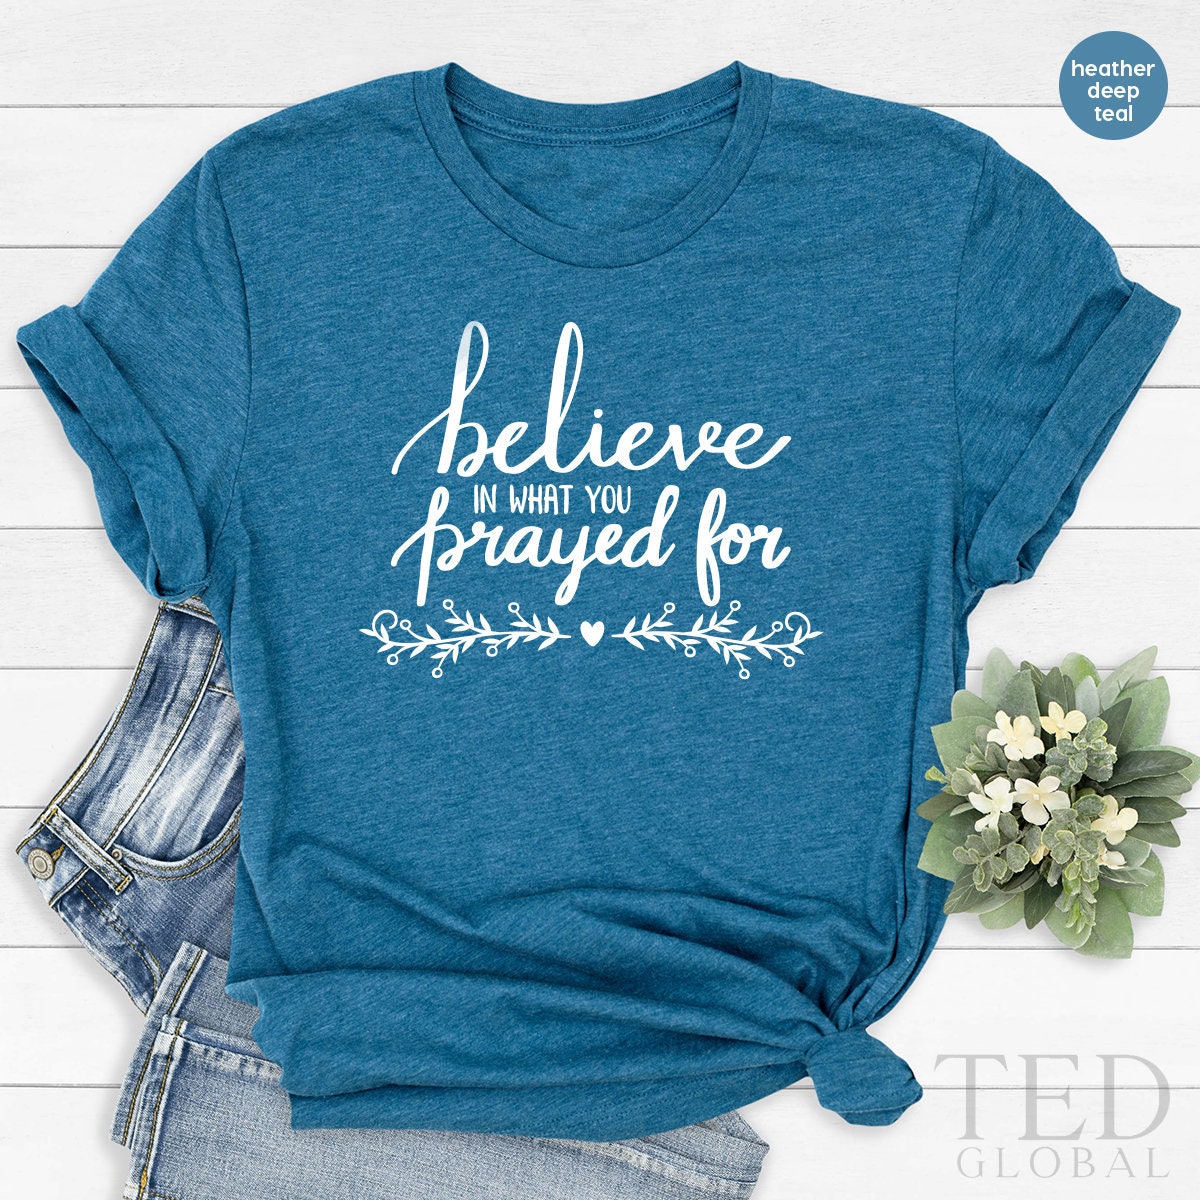 Religious TShirt,Believer T Shirt,Christian T Shirt,Inspirational Shirt,Church T-Shirts,Believe In What You Prayed For Shirt,Blessed Shirt - Fastdeliverytees.com